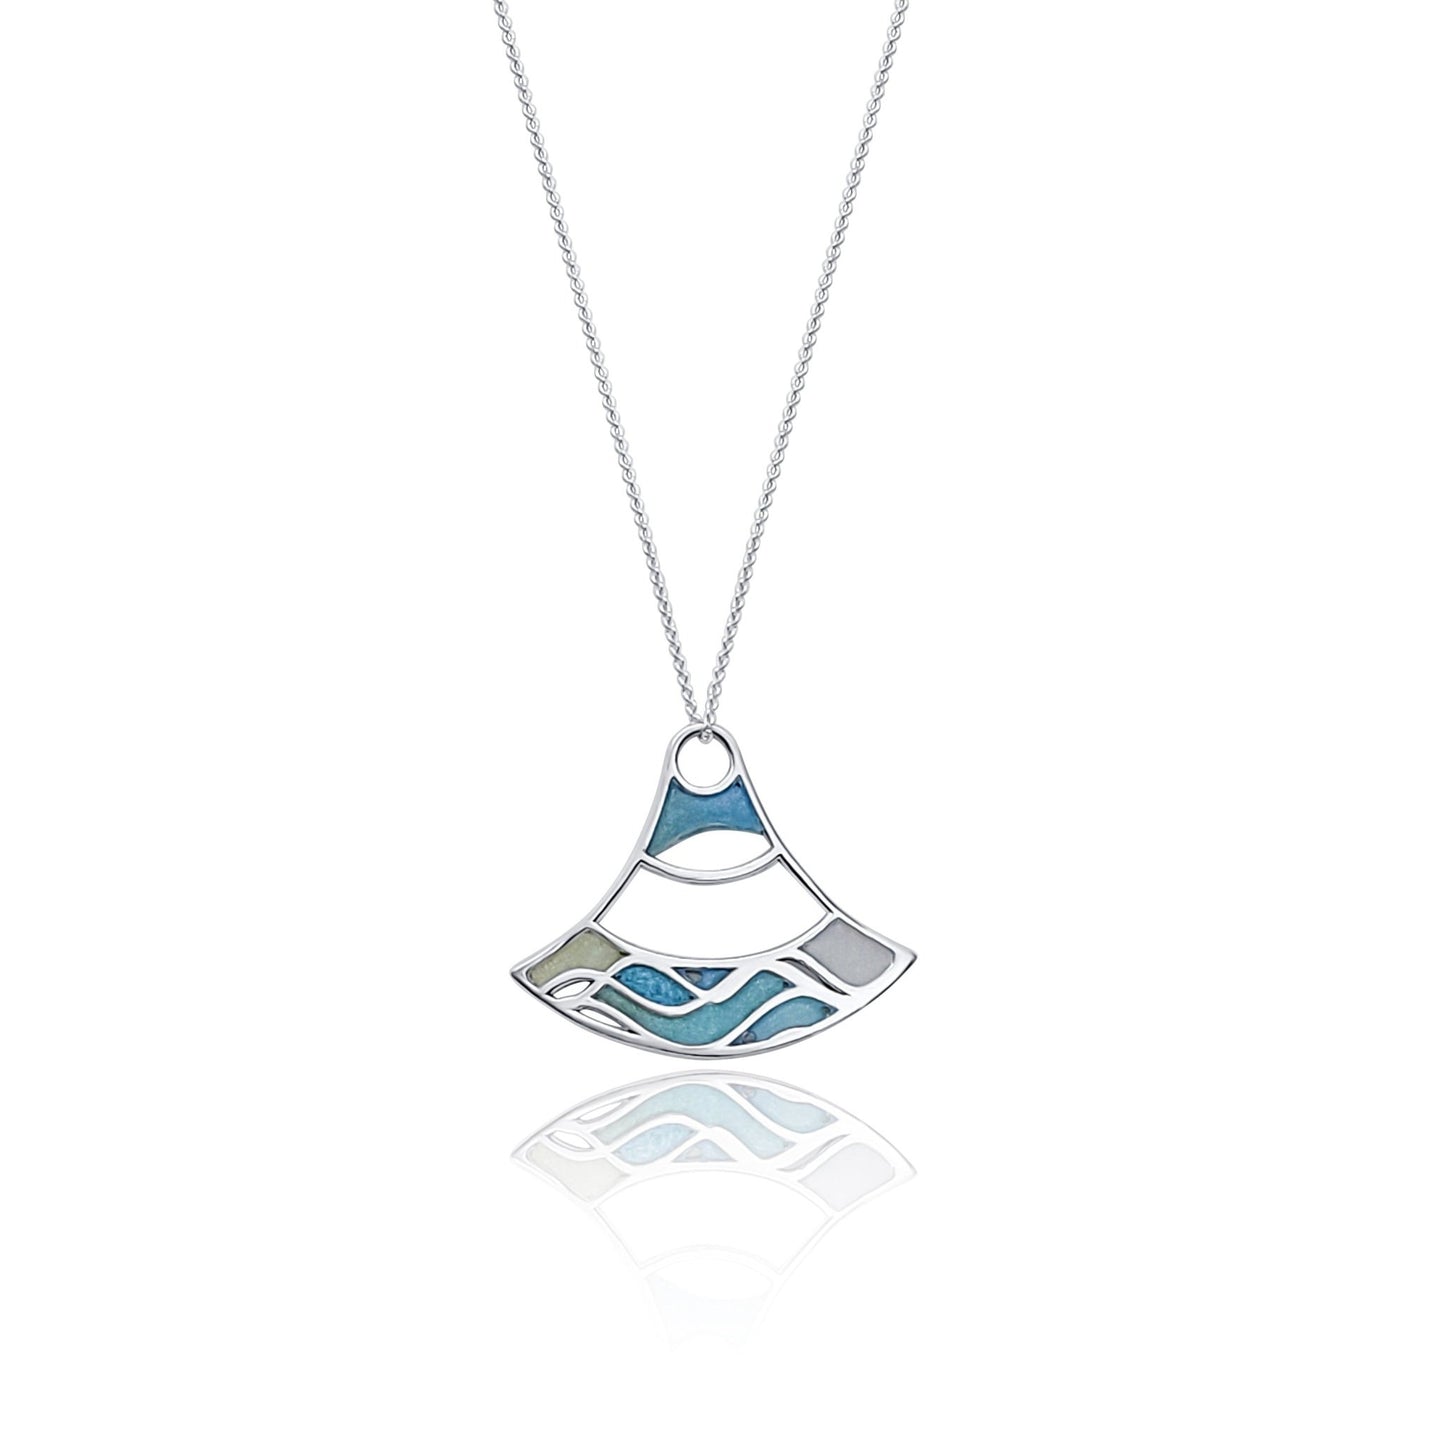 Nalu double wave design with blue water design statement pendant necklace